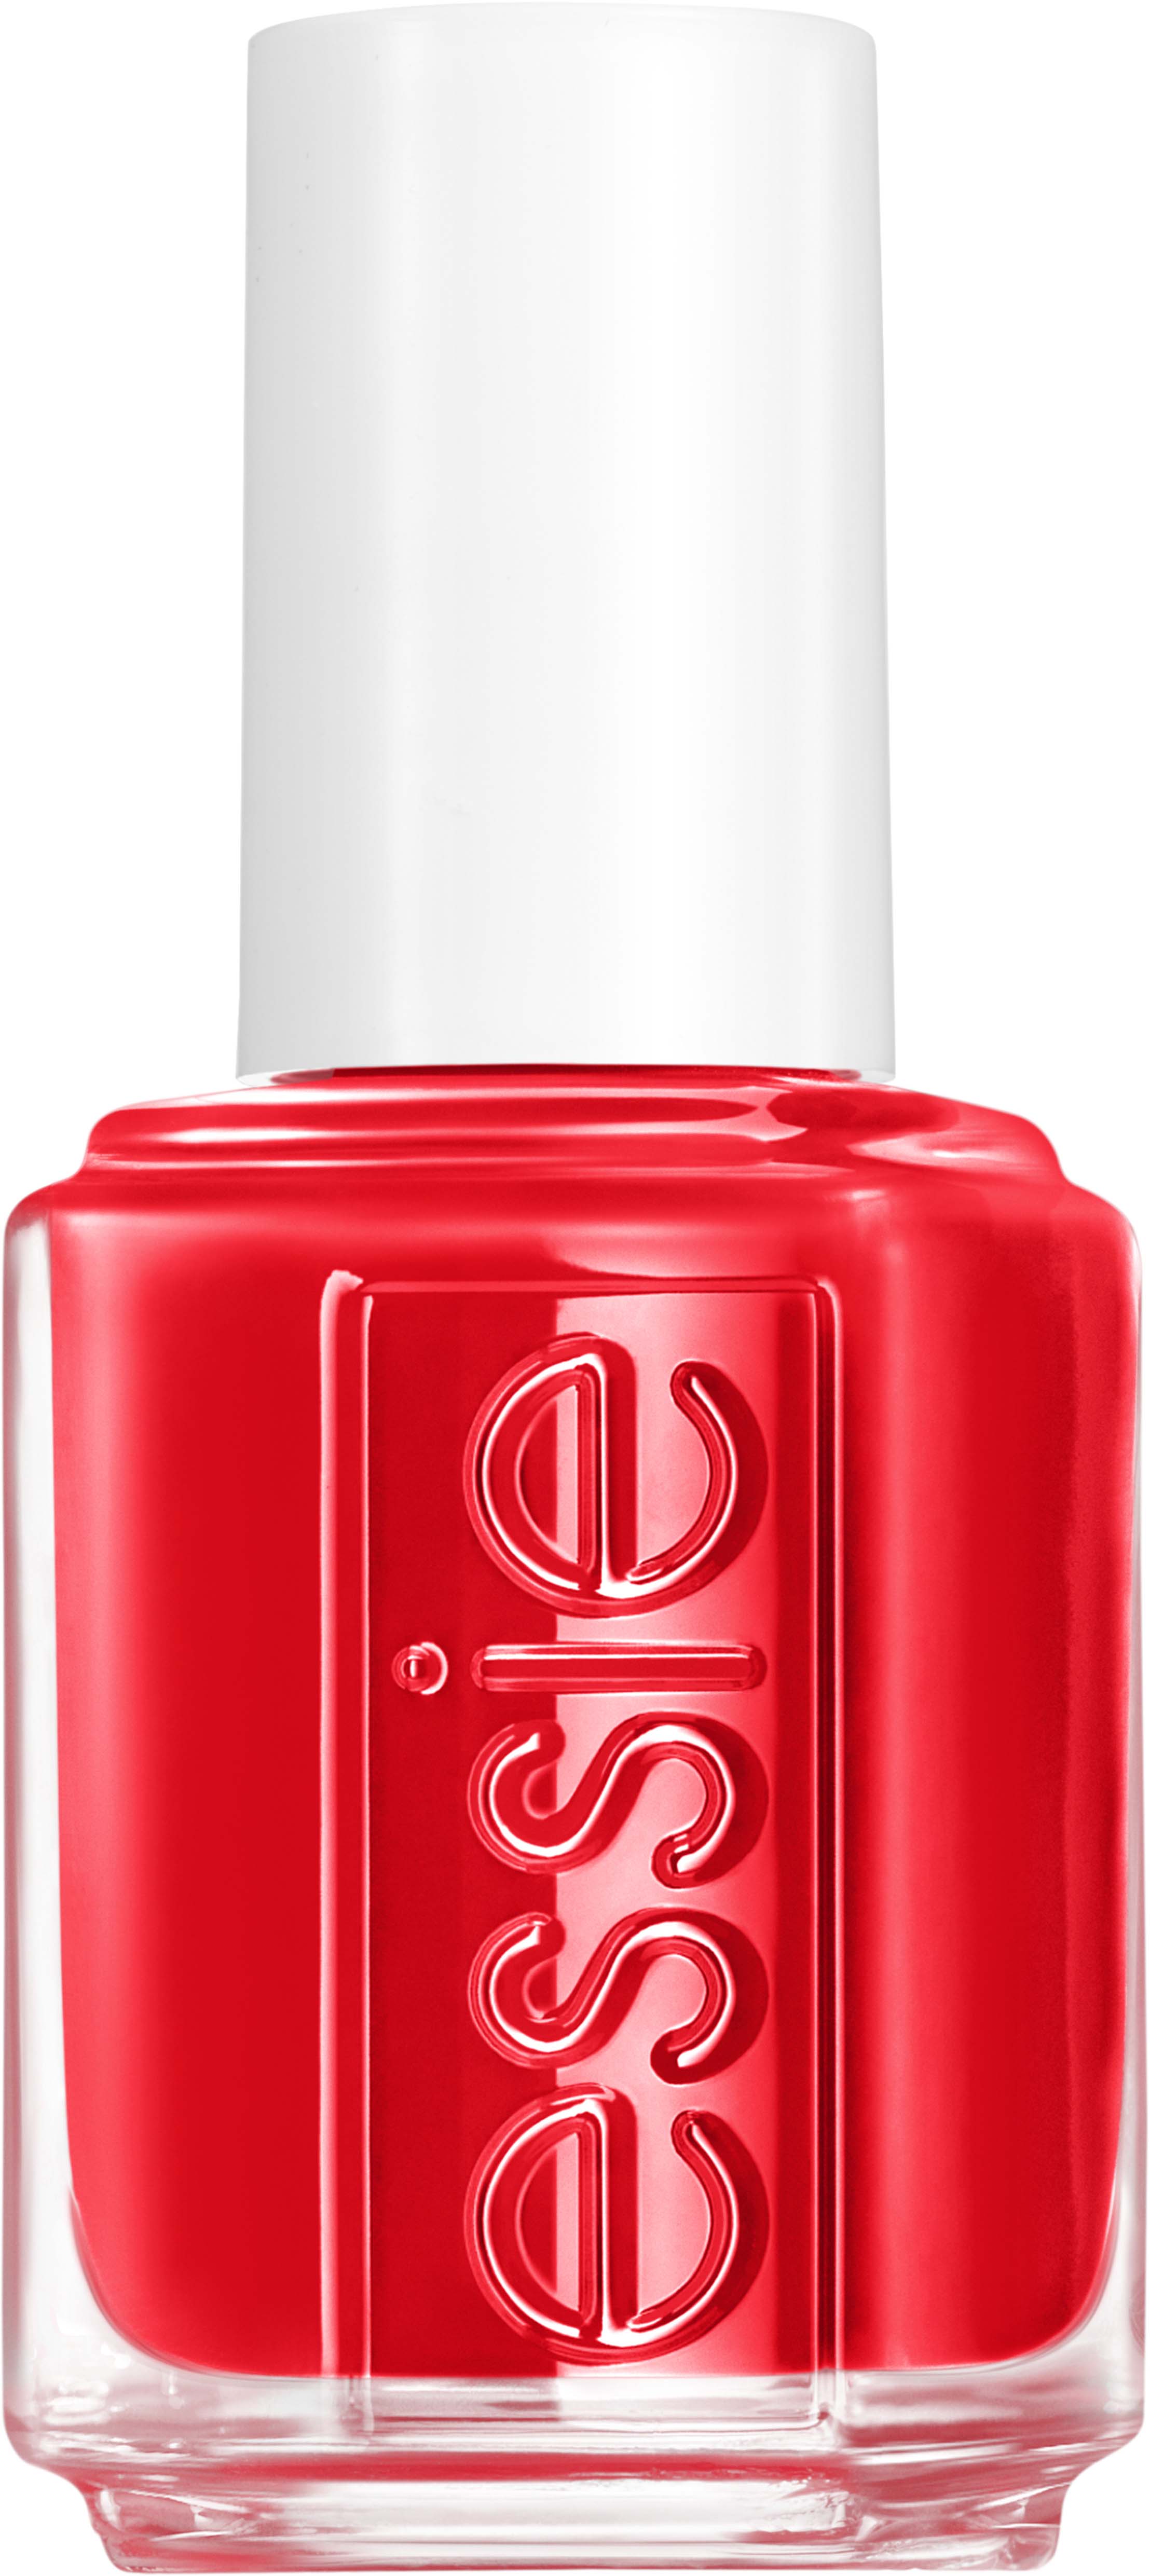 Essie Nail Midsummer 781 Bunches Collection Laqcuer Of Love